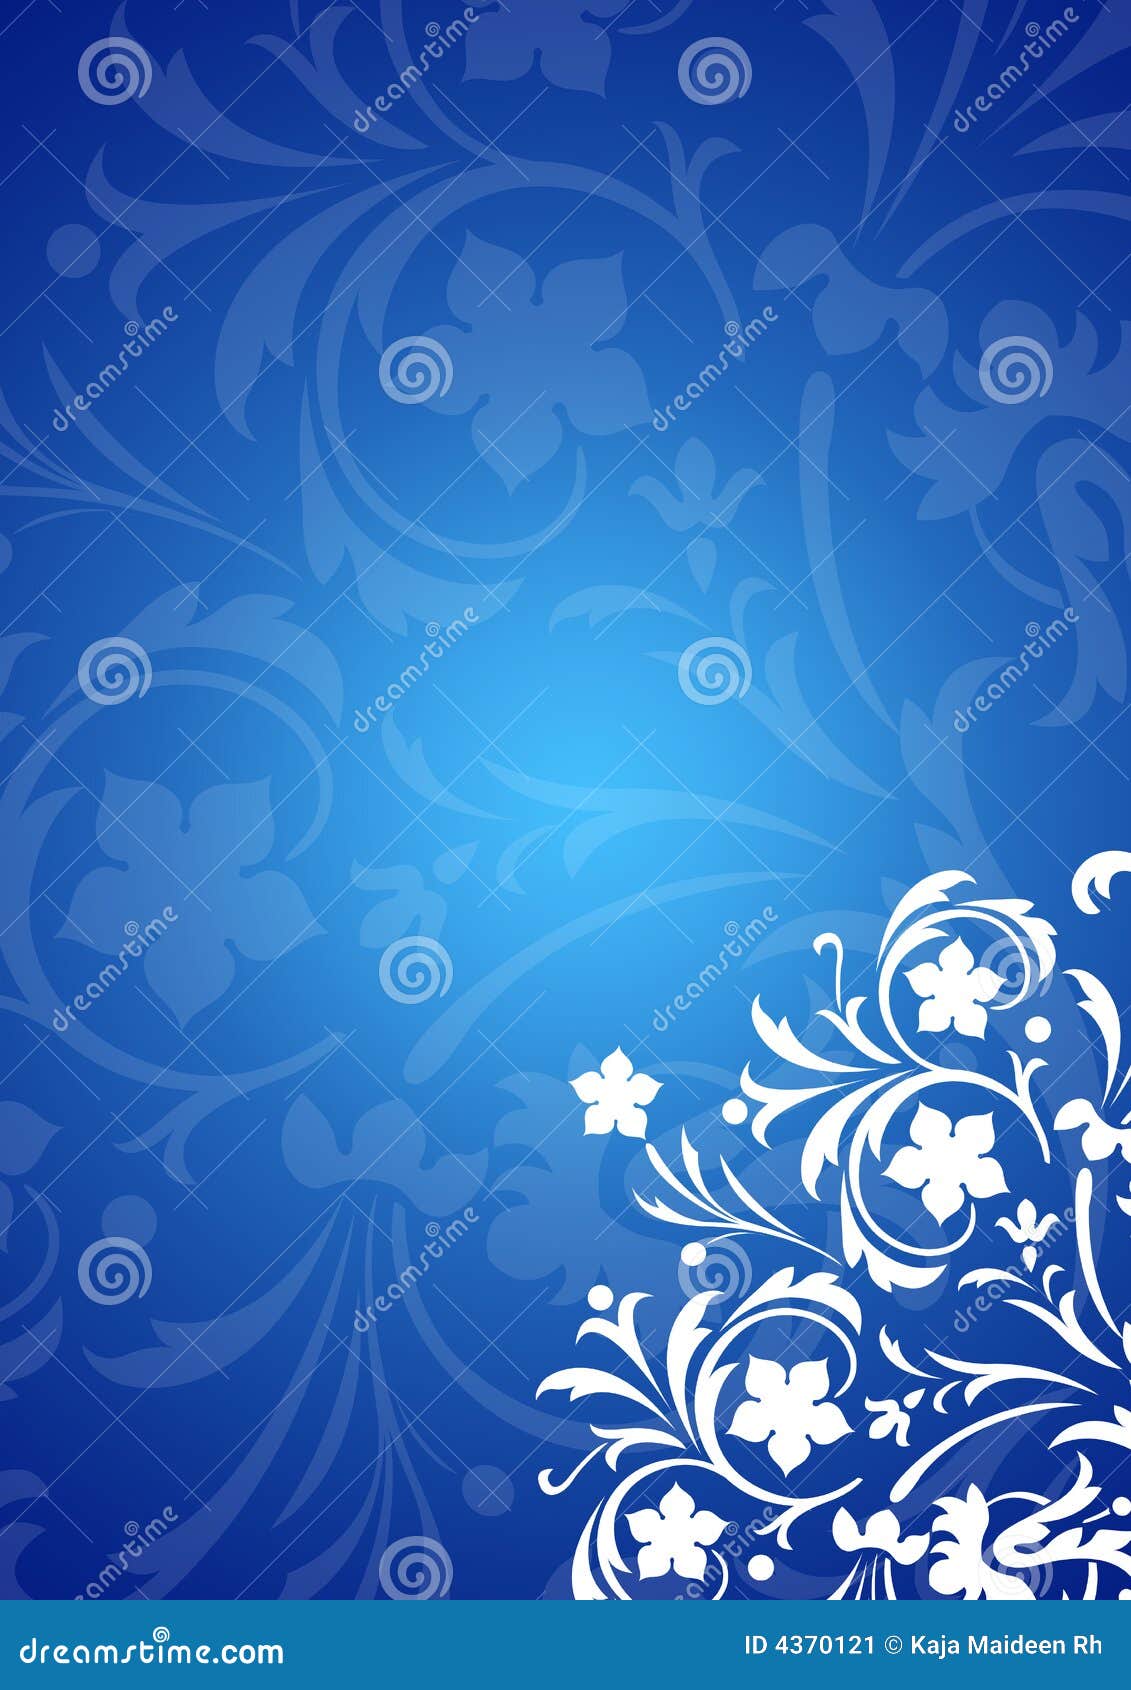 Blue Floral Background Vector Art  Graphics  freevectorcom